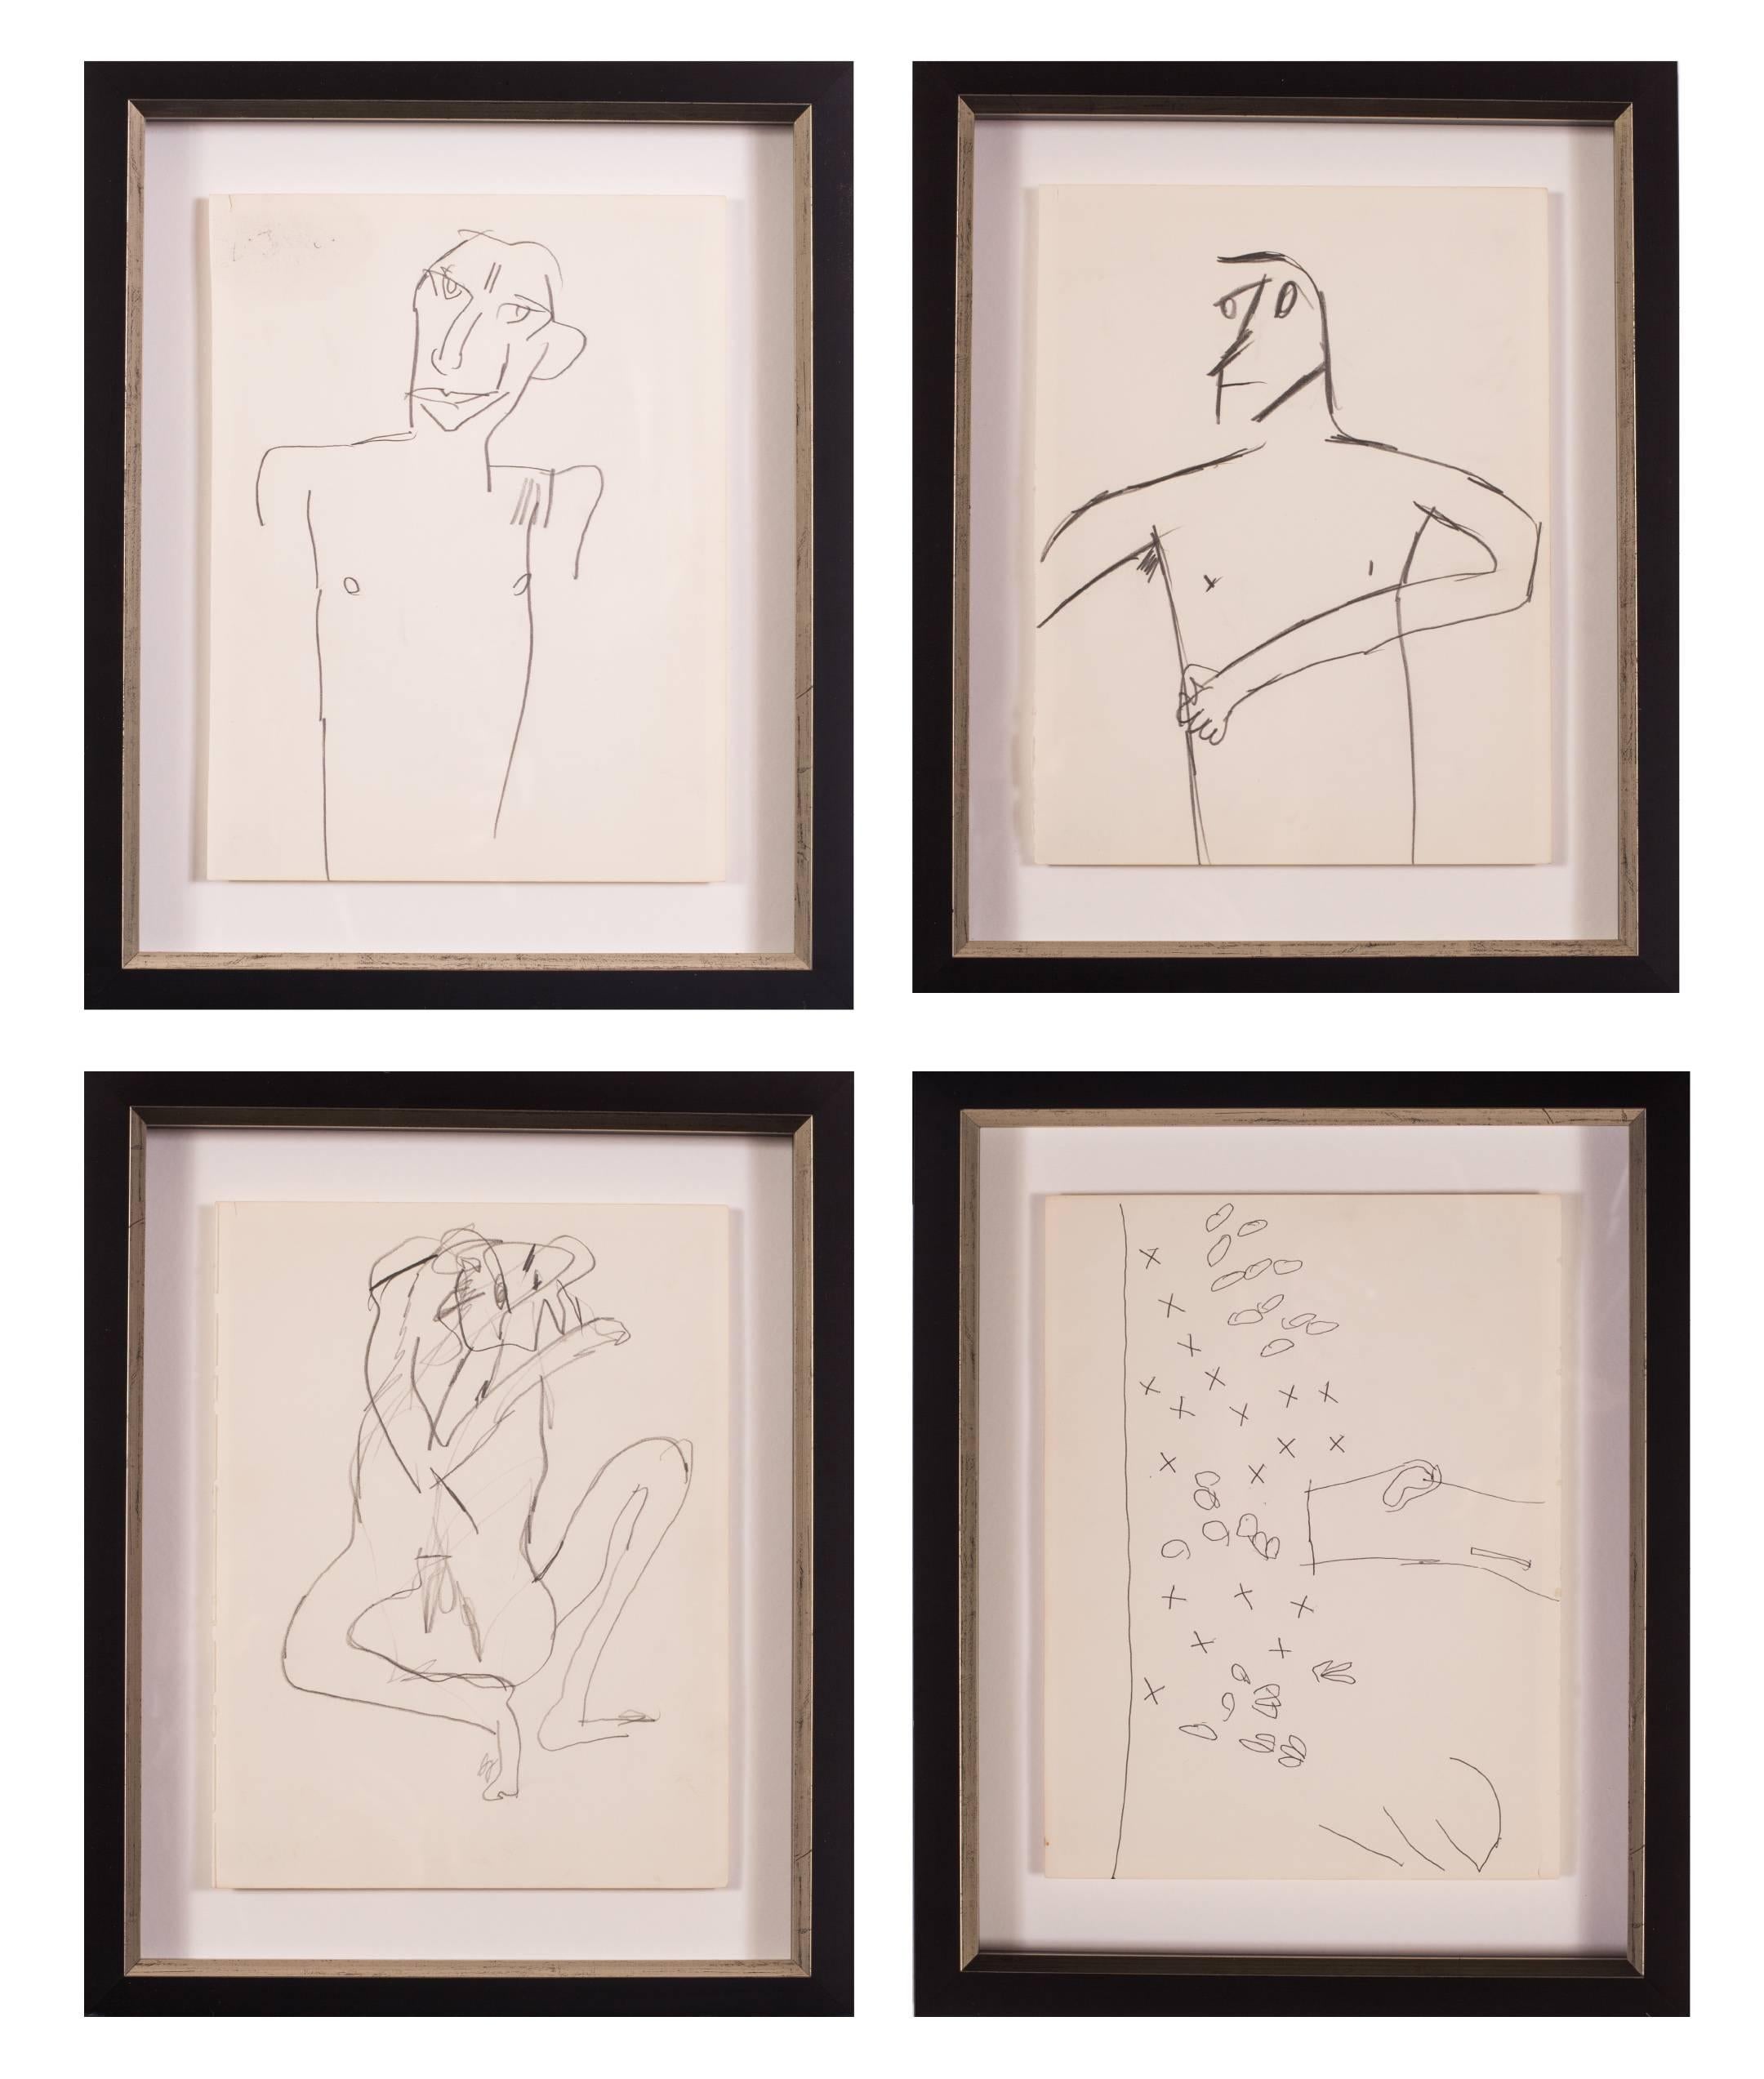 Keith Vaughan (British, 1912-1977)
Male figure; Figure in profile; A sexual encounter; and Noughts and Crosses
All with studio stamp `KV’ (on the reverse)
All from the album `MAHLER 1974 Harrow Hall’
All 9.7/8 x 7.1/2 in. (25.1 x 19 cm.)
13.5/8 x